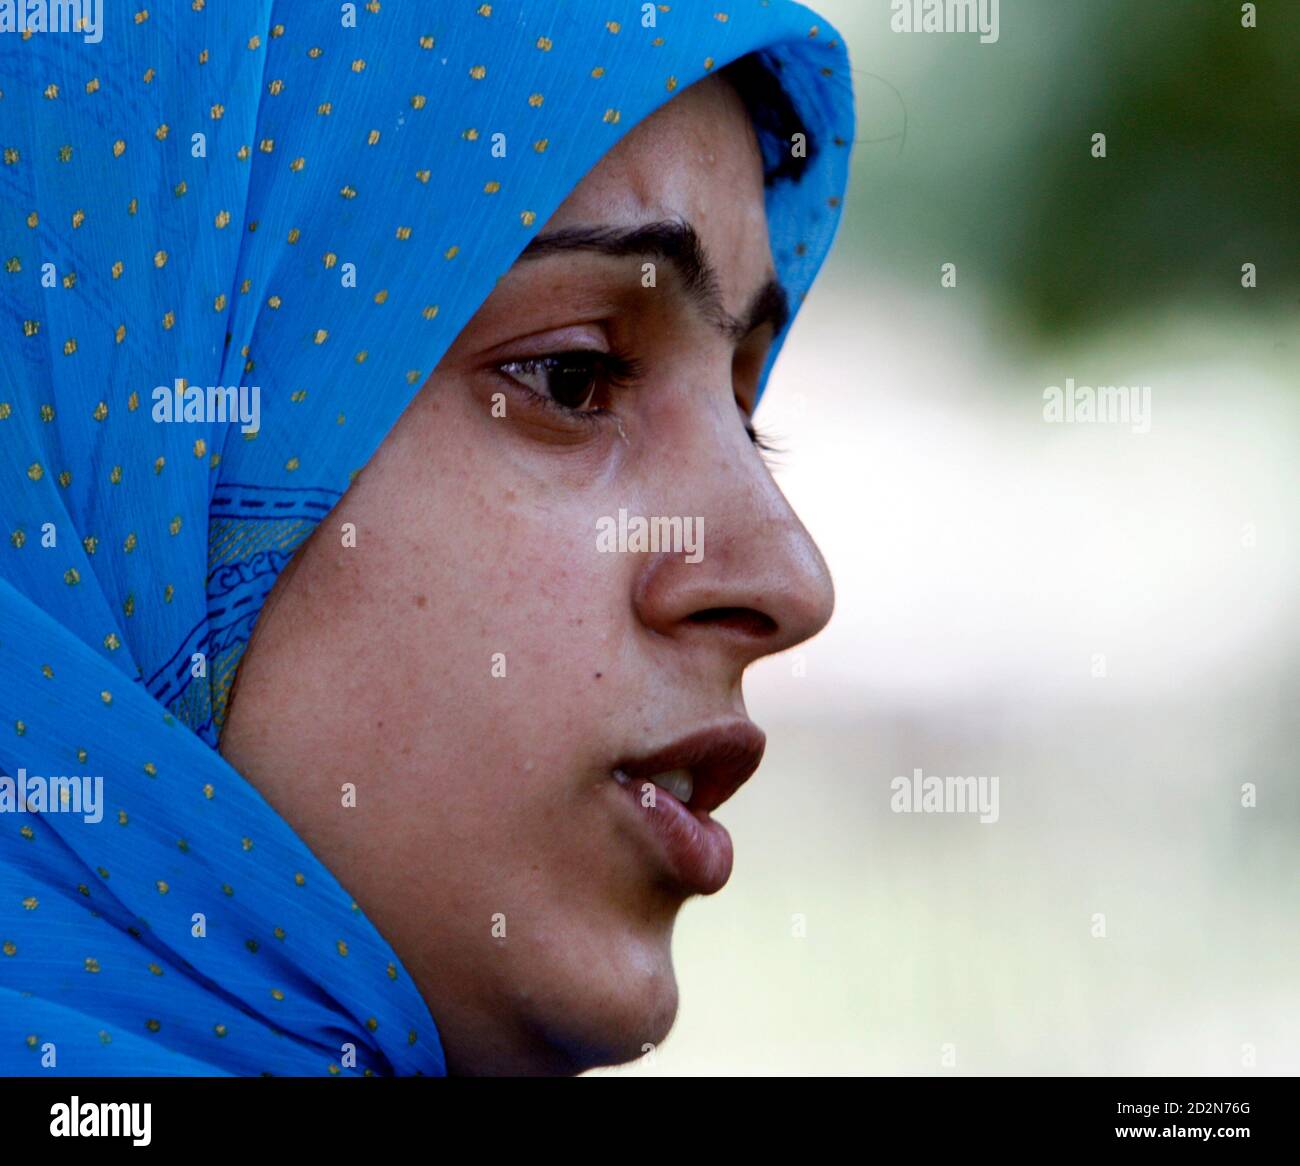 A Kashmiri Muslim cries while narrating the tale about her 'missing' father during a peaceful demonstration organised by the Association of Parents of Disappeared Persons (APDP) to mark the International Day of the Disappeared in Srinagar August 30, 2007. The APDP says that more than 8000 people have gone missing, most of them after their arrest by Indian security forces in the troubled Kashmir region since a rebellion broke out at the end of 1989. REUTERS/Fayaz Kabli (INDIAN-ADMINISTERED KASHMIR) Stock Photo